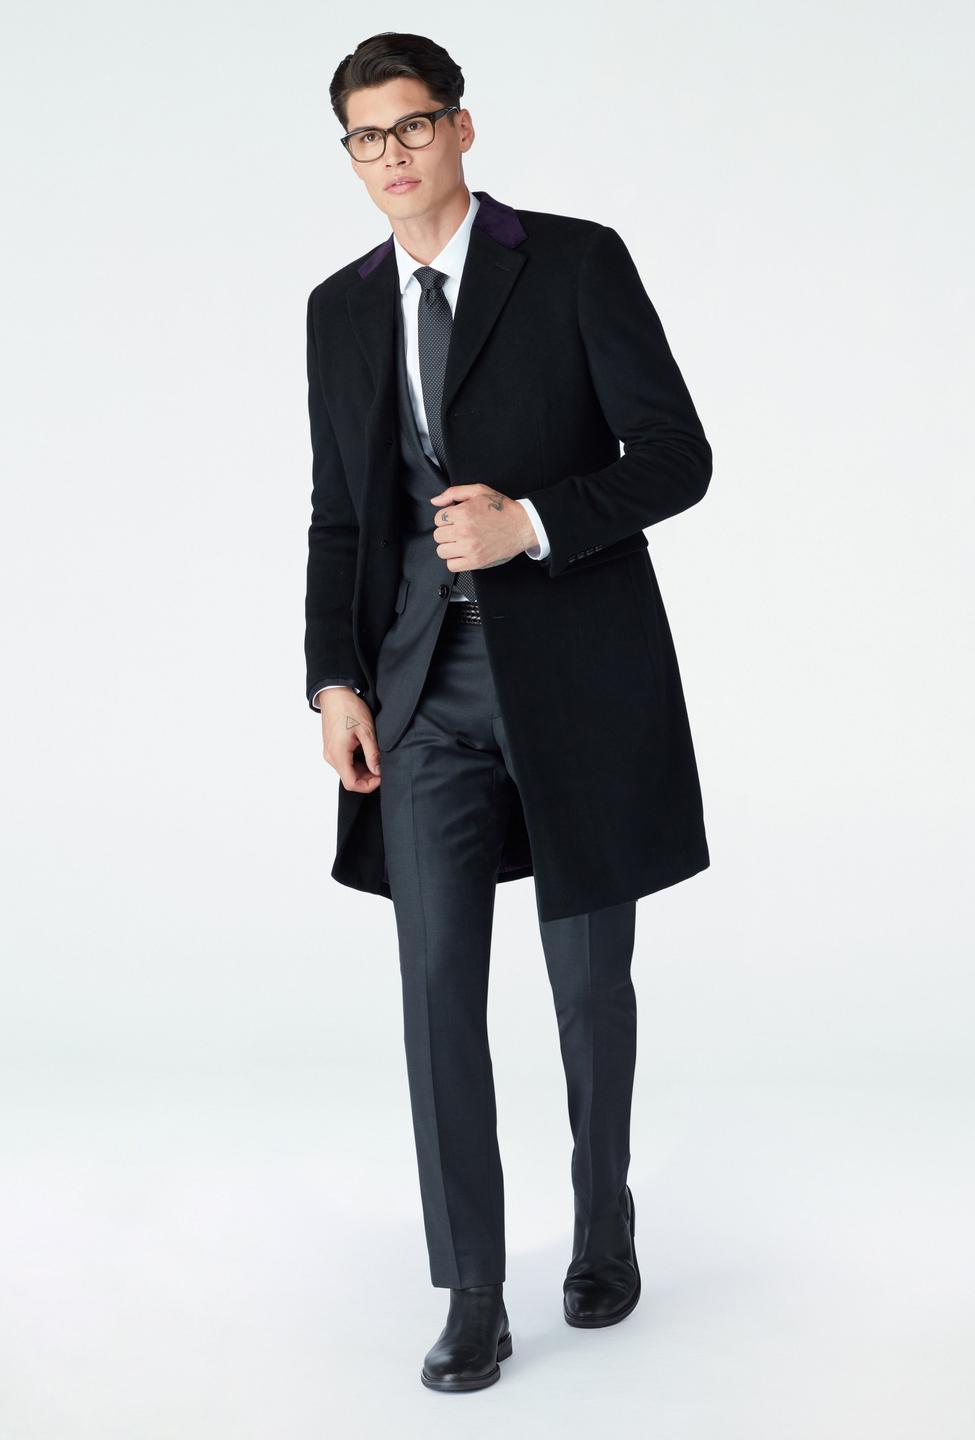 Black outerwear - Huntley Solid Design from Indochino Collection